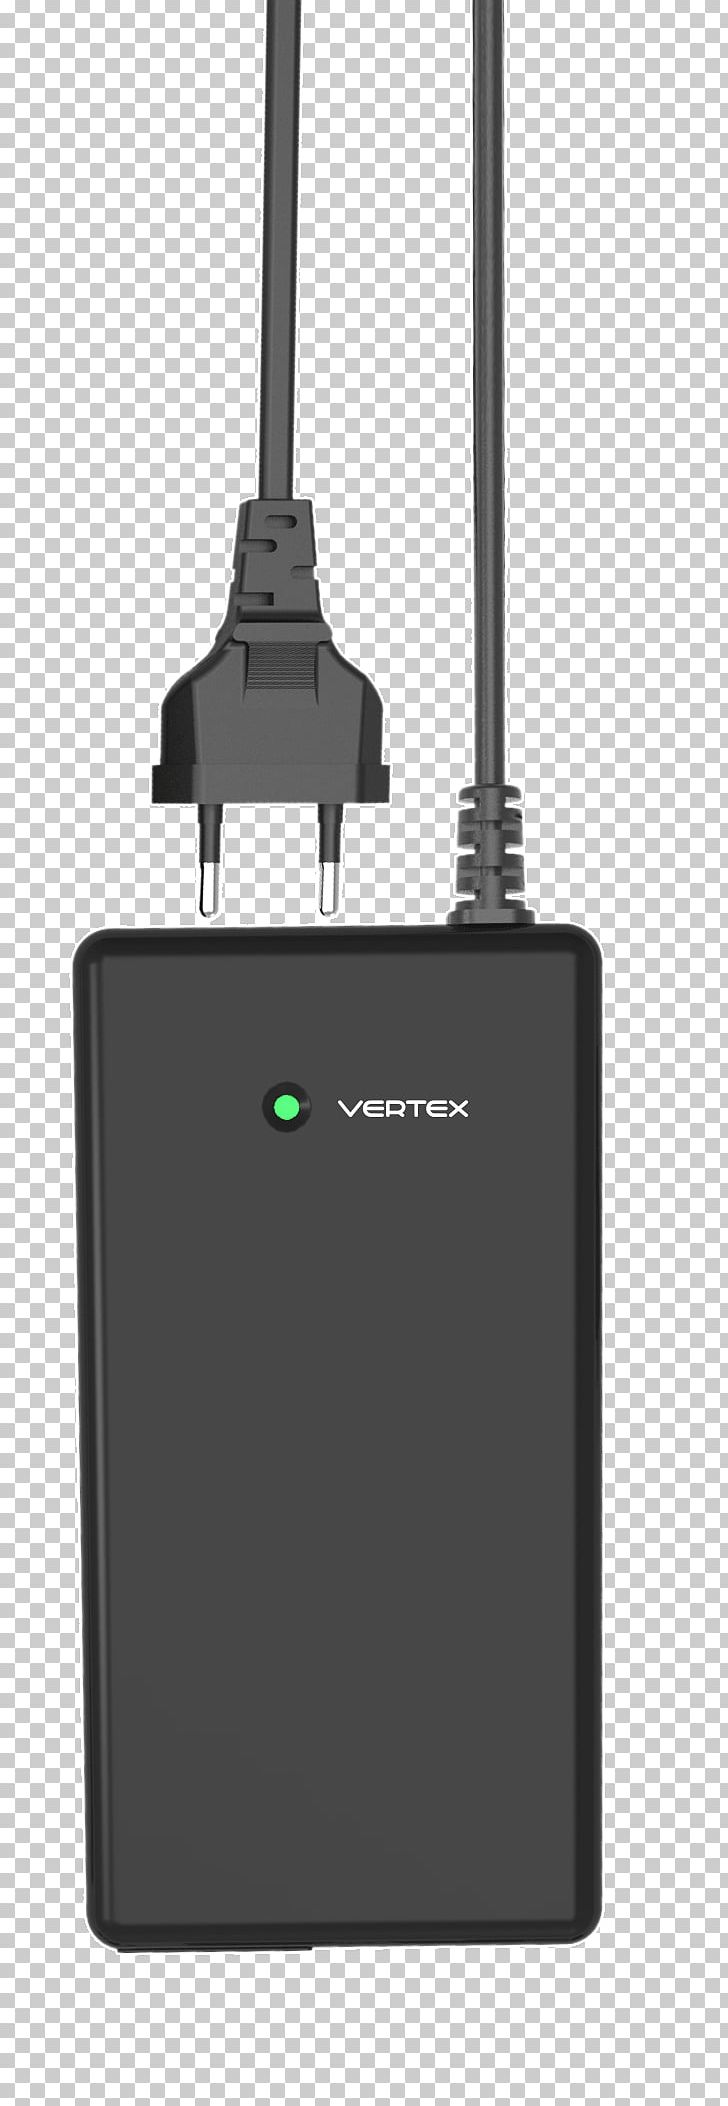 Wireless Router Laptop Wireless Access Points Network Cards & Adapters PNG, Clipart, Adapter, Computer, Computer Network, Controller, Electronics Free PNG Download